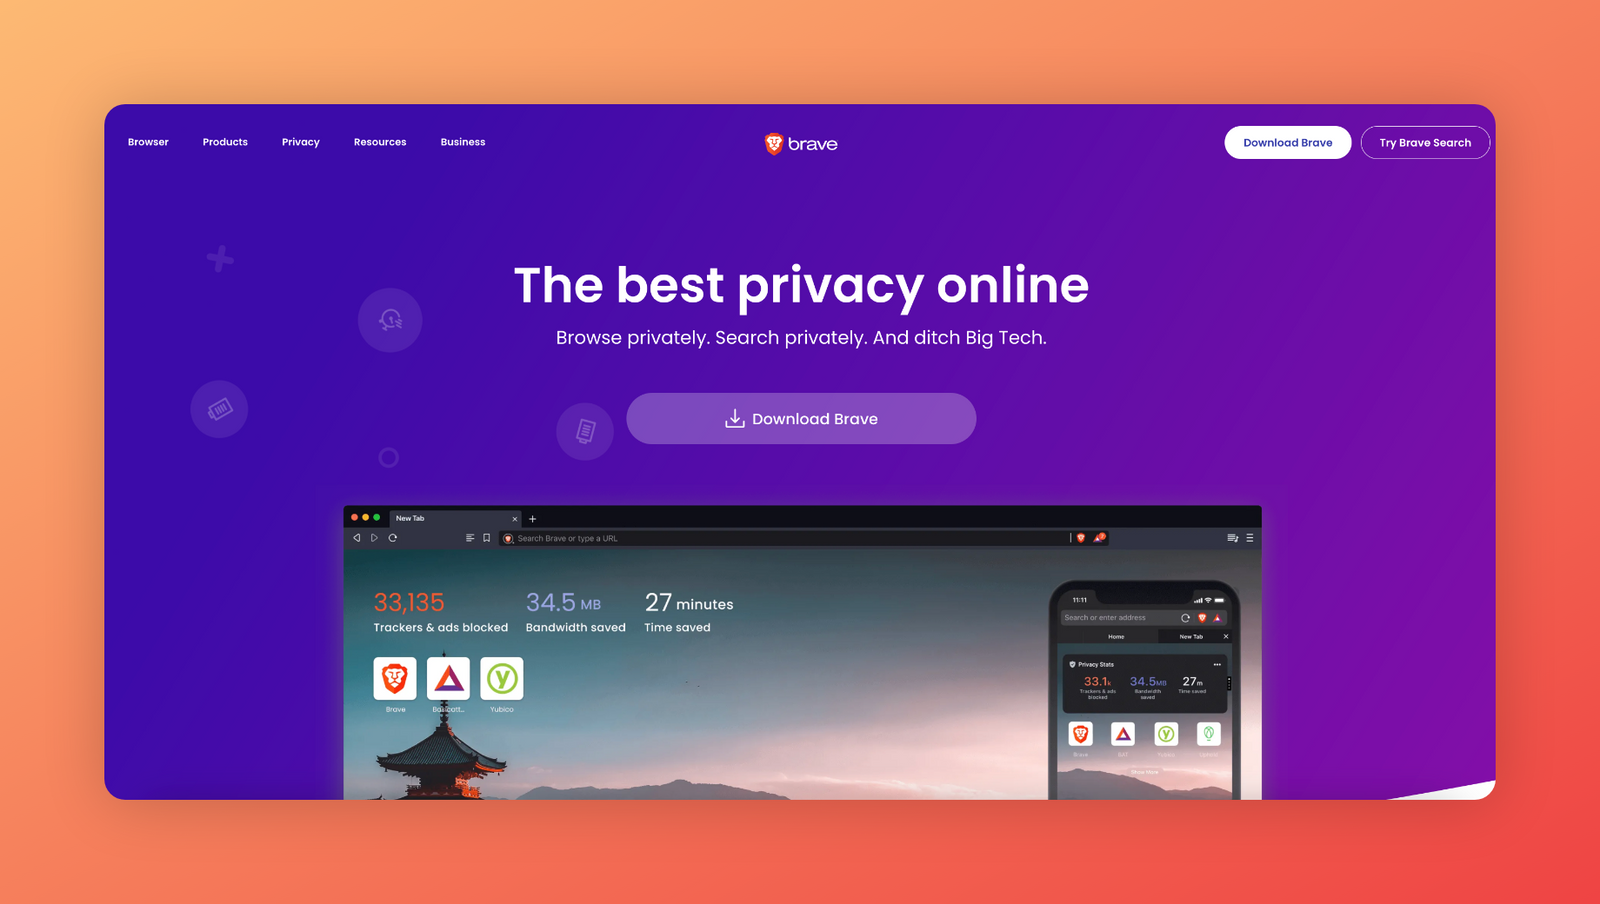 The Brave browser homepage.